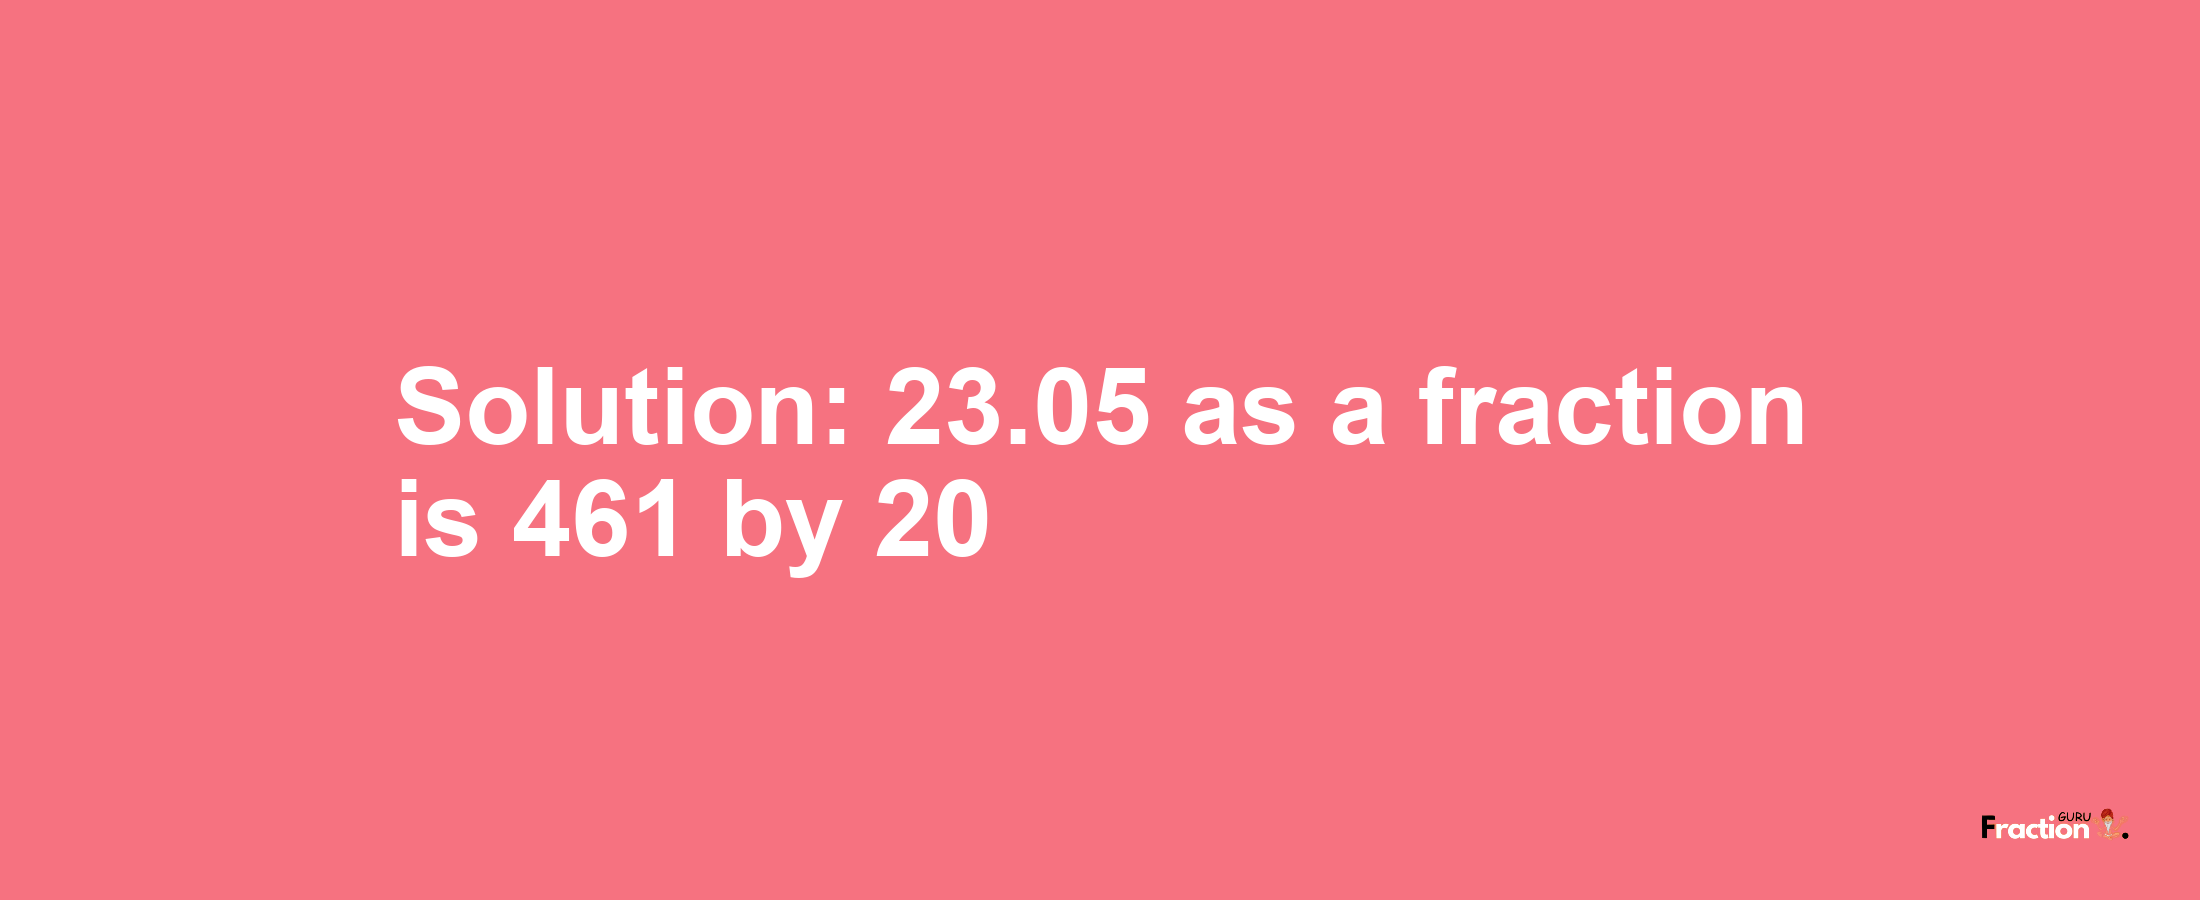 Solution:23.05 as a fraction is 461/20